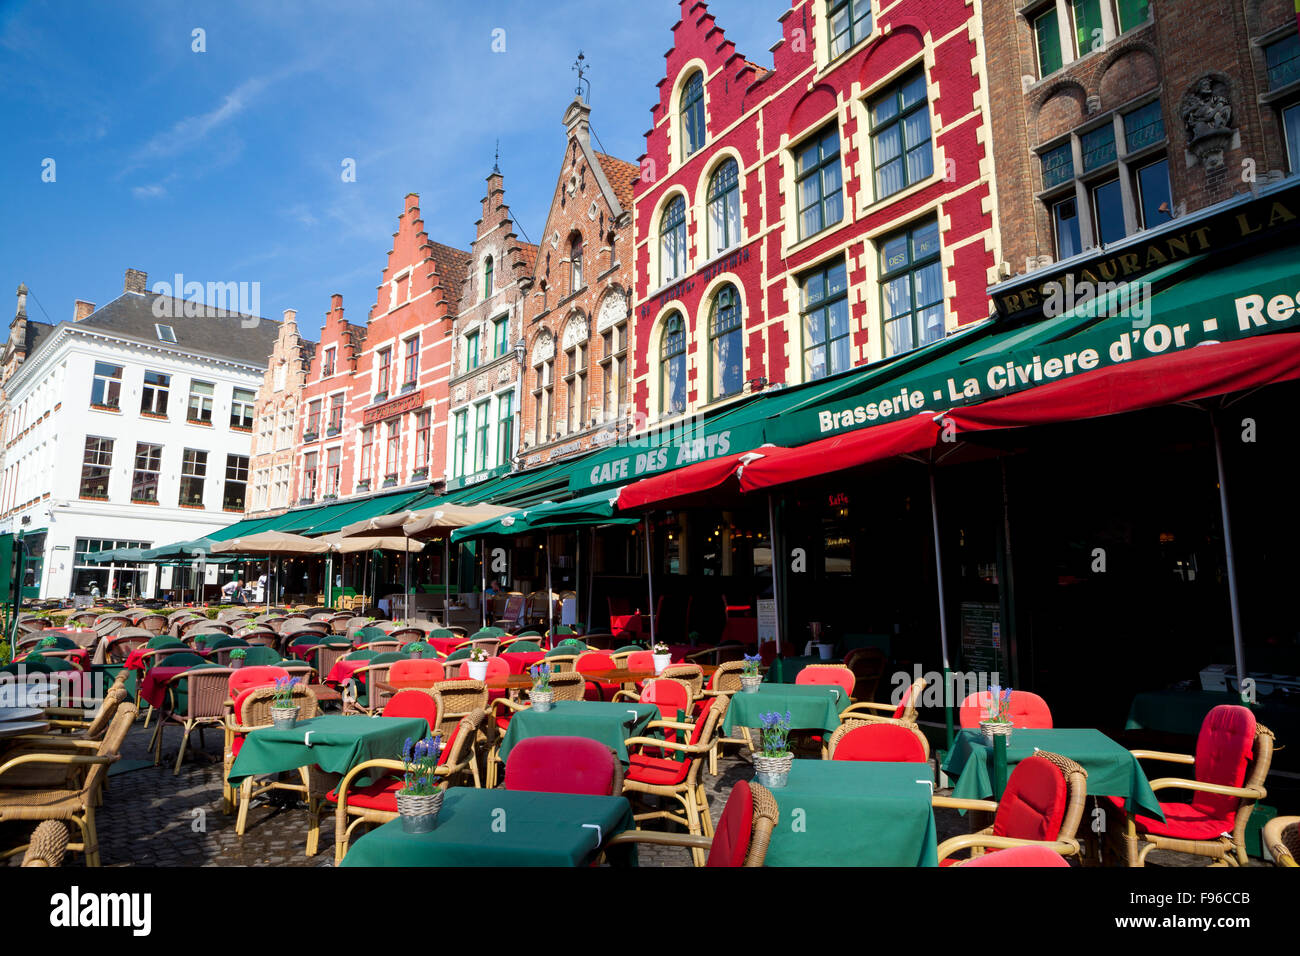 Historic Buildings, Outdoor Restaurants and Cafes surrounding Market Square, Bruges, Belgium Stock Photo